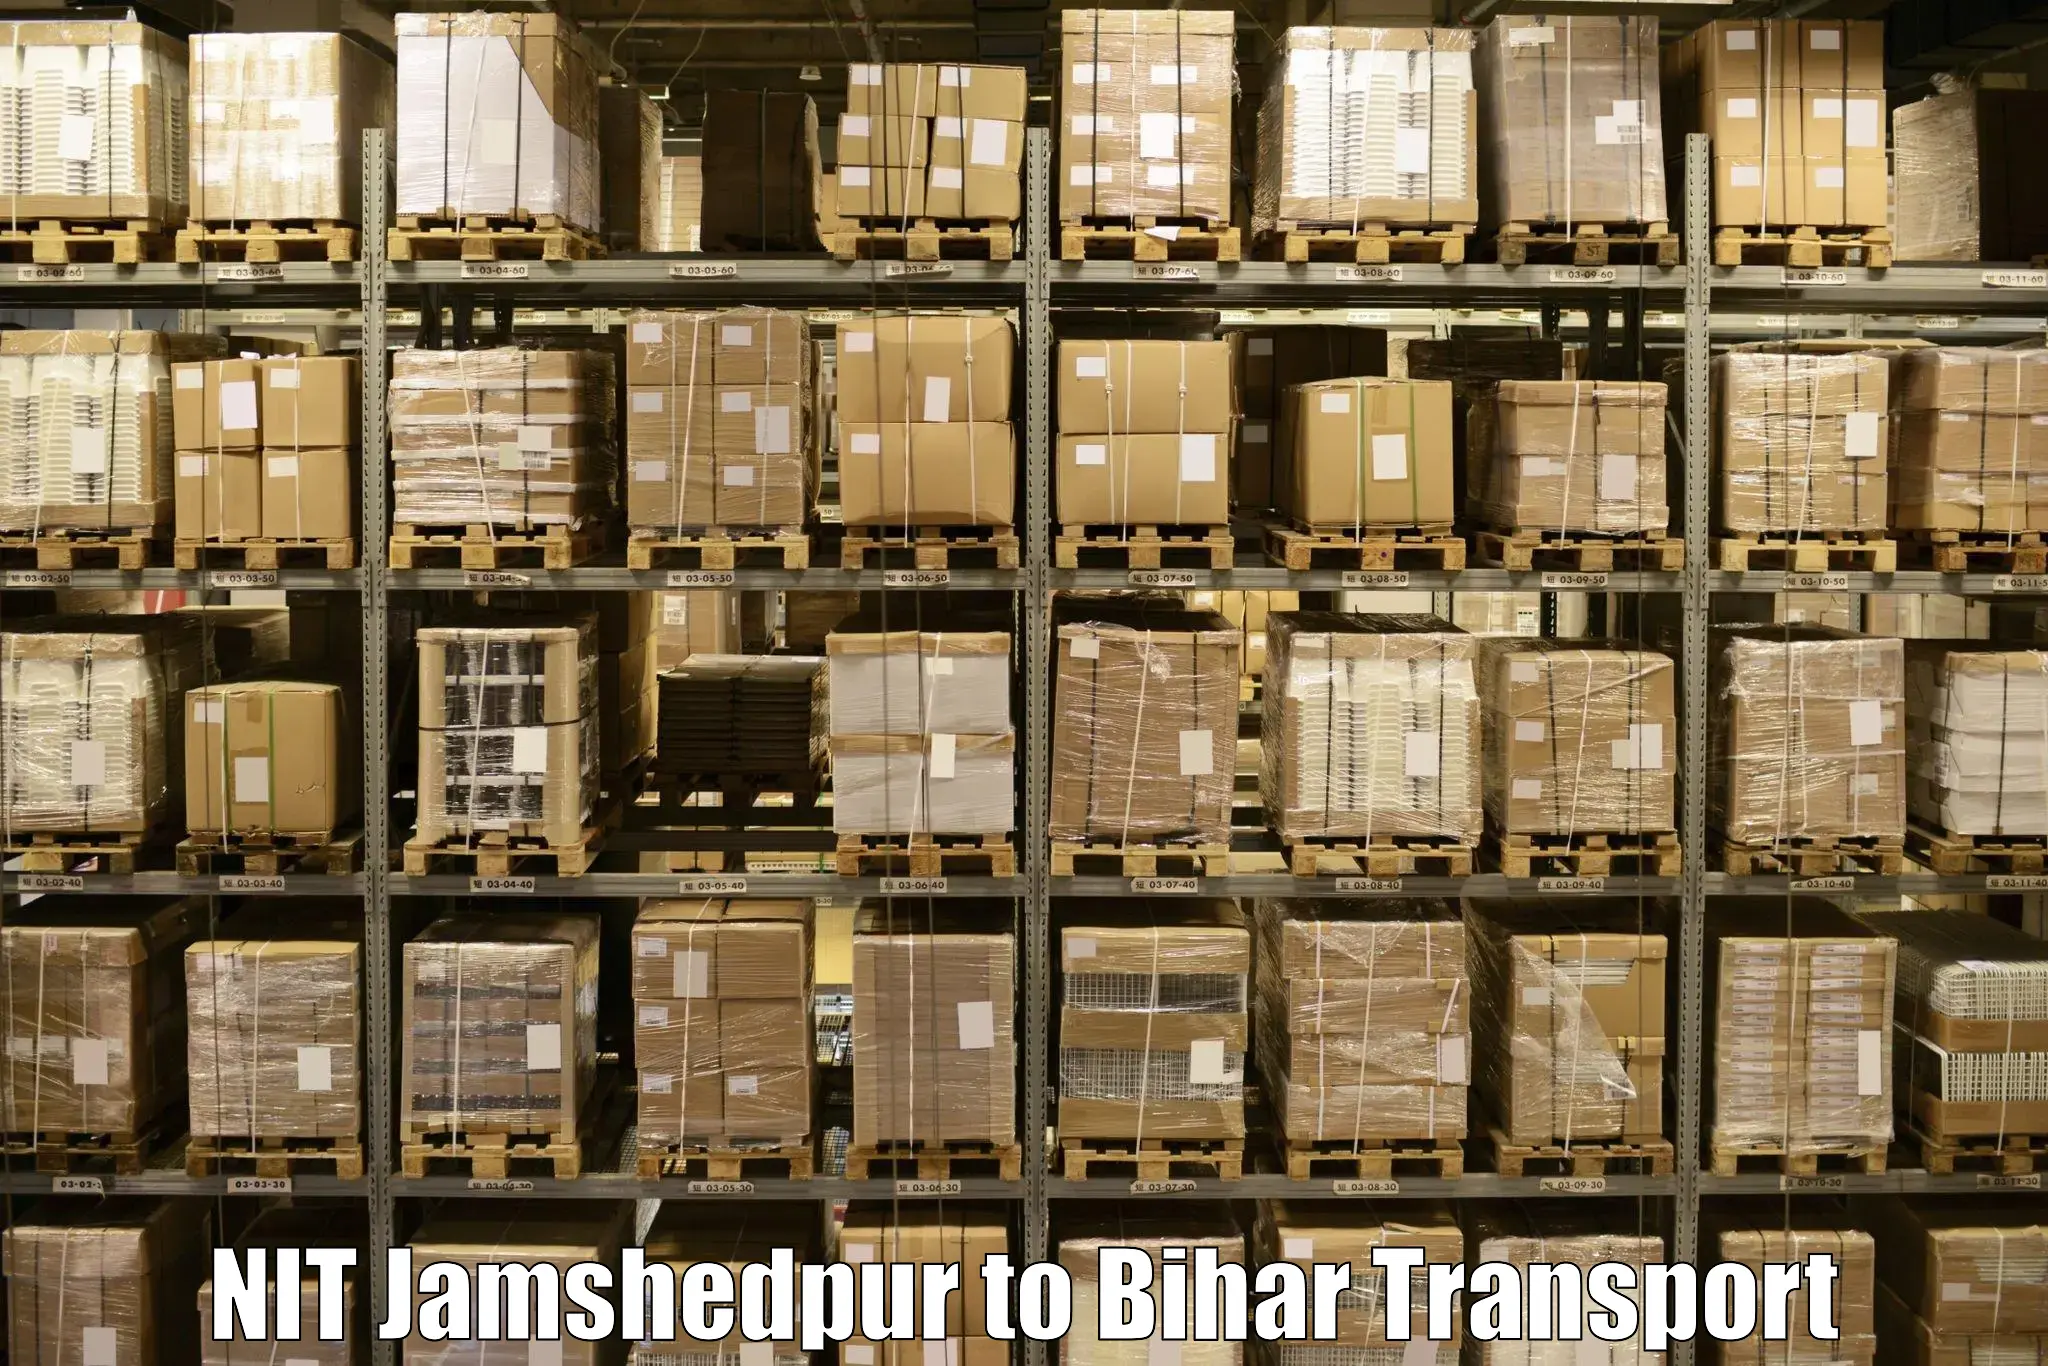 Cargo train transport services in NIT Jamshedpur to Bhabua